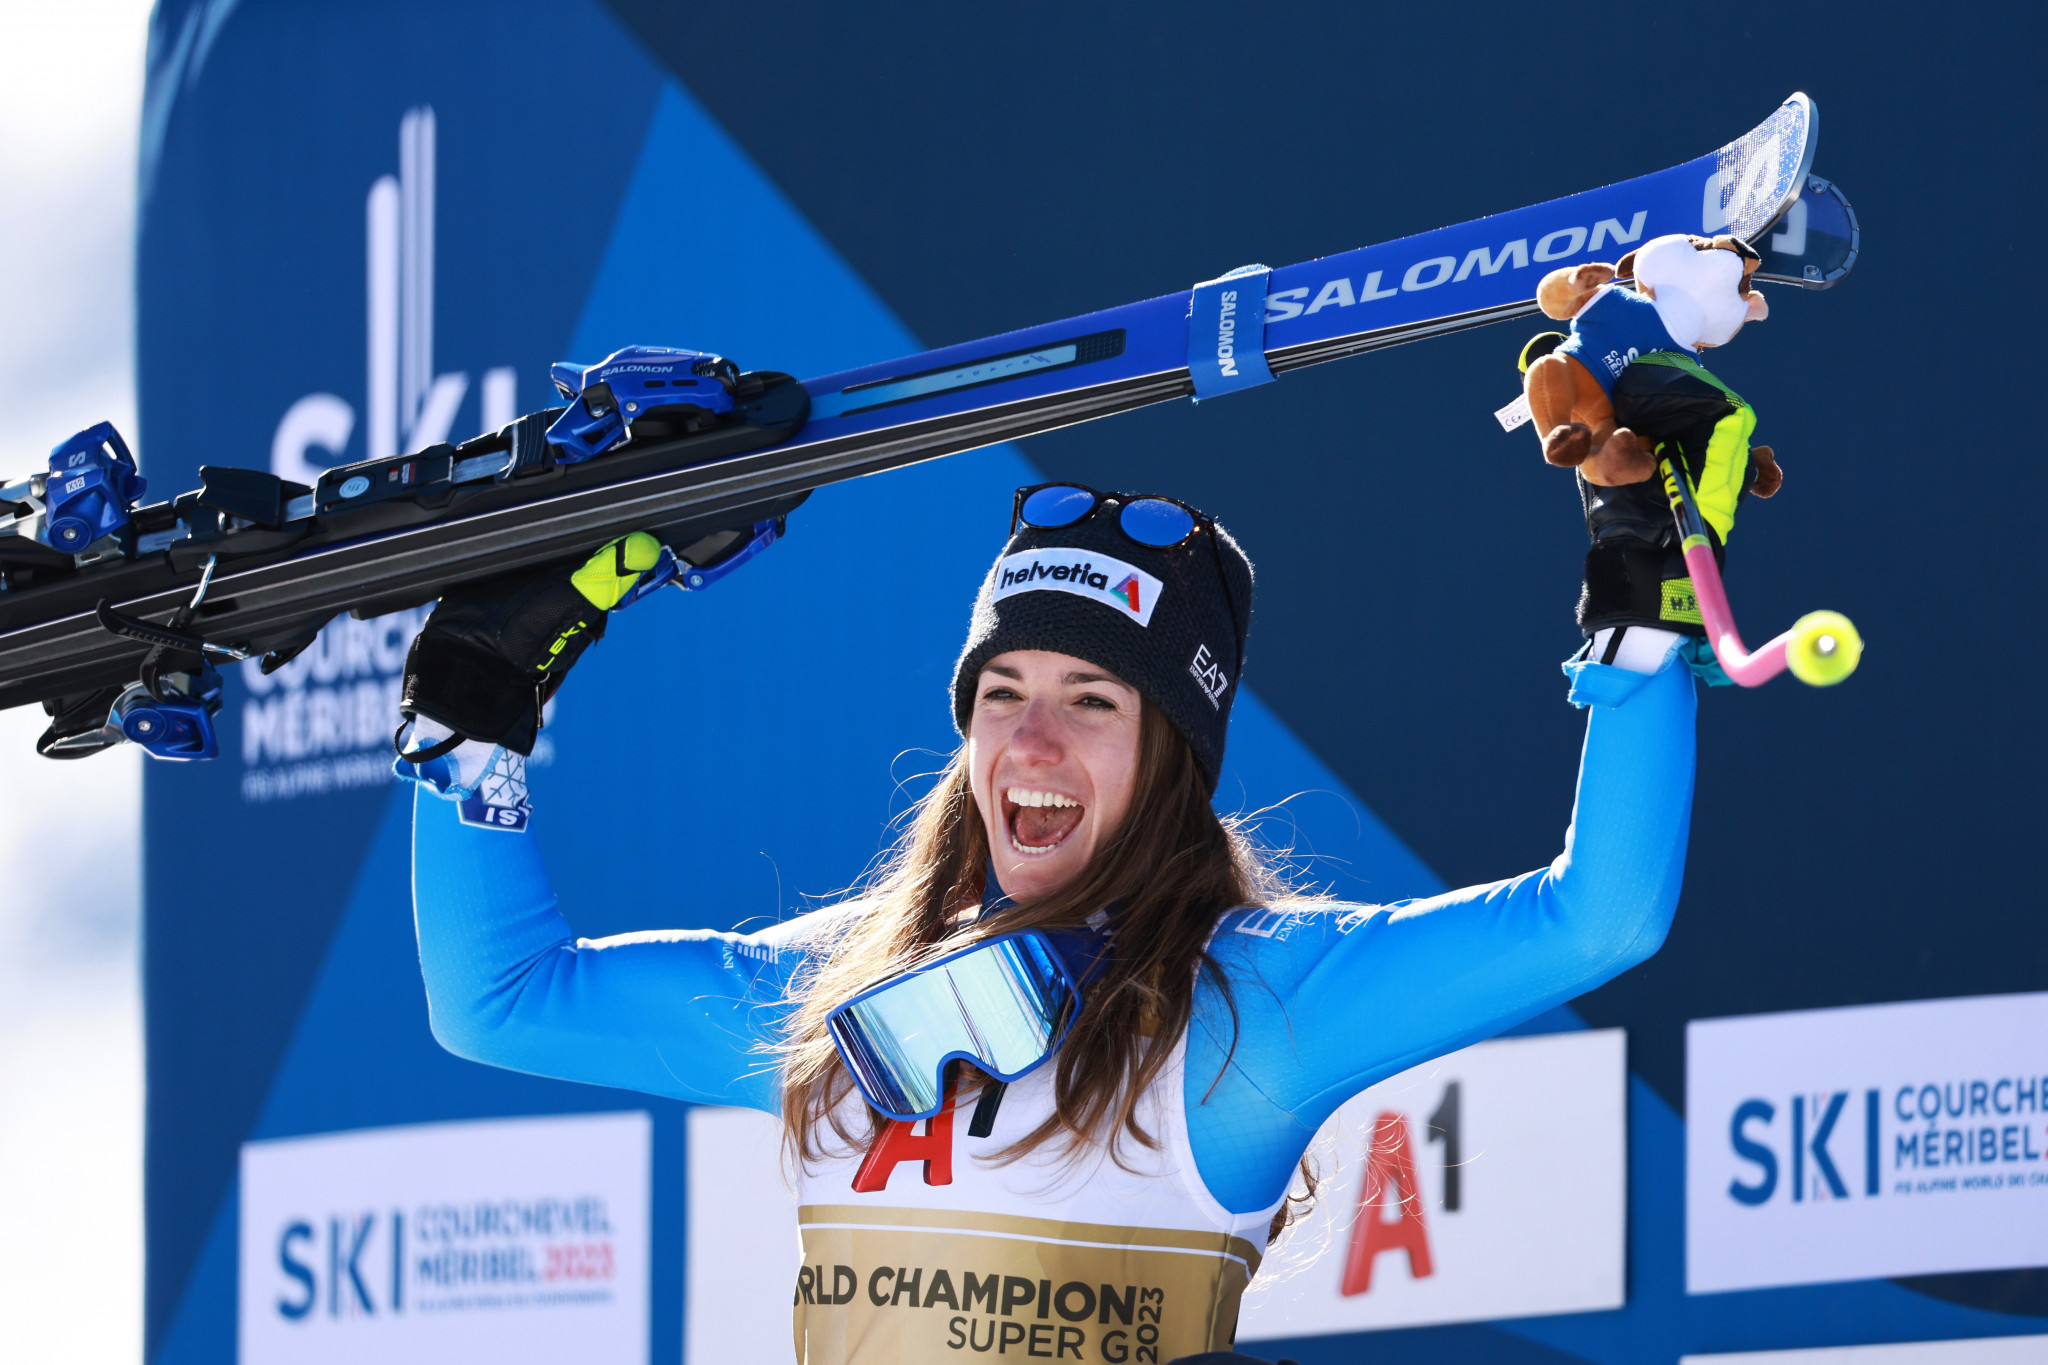 Italy earn second world title as Bassino claims surprise super-G gold